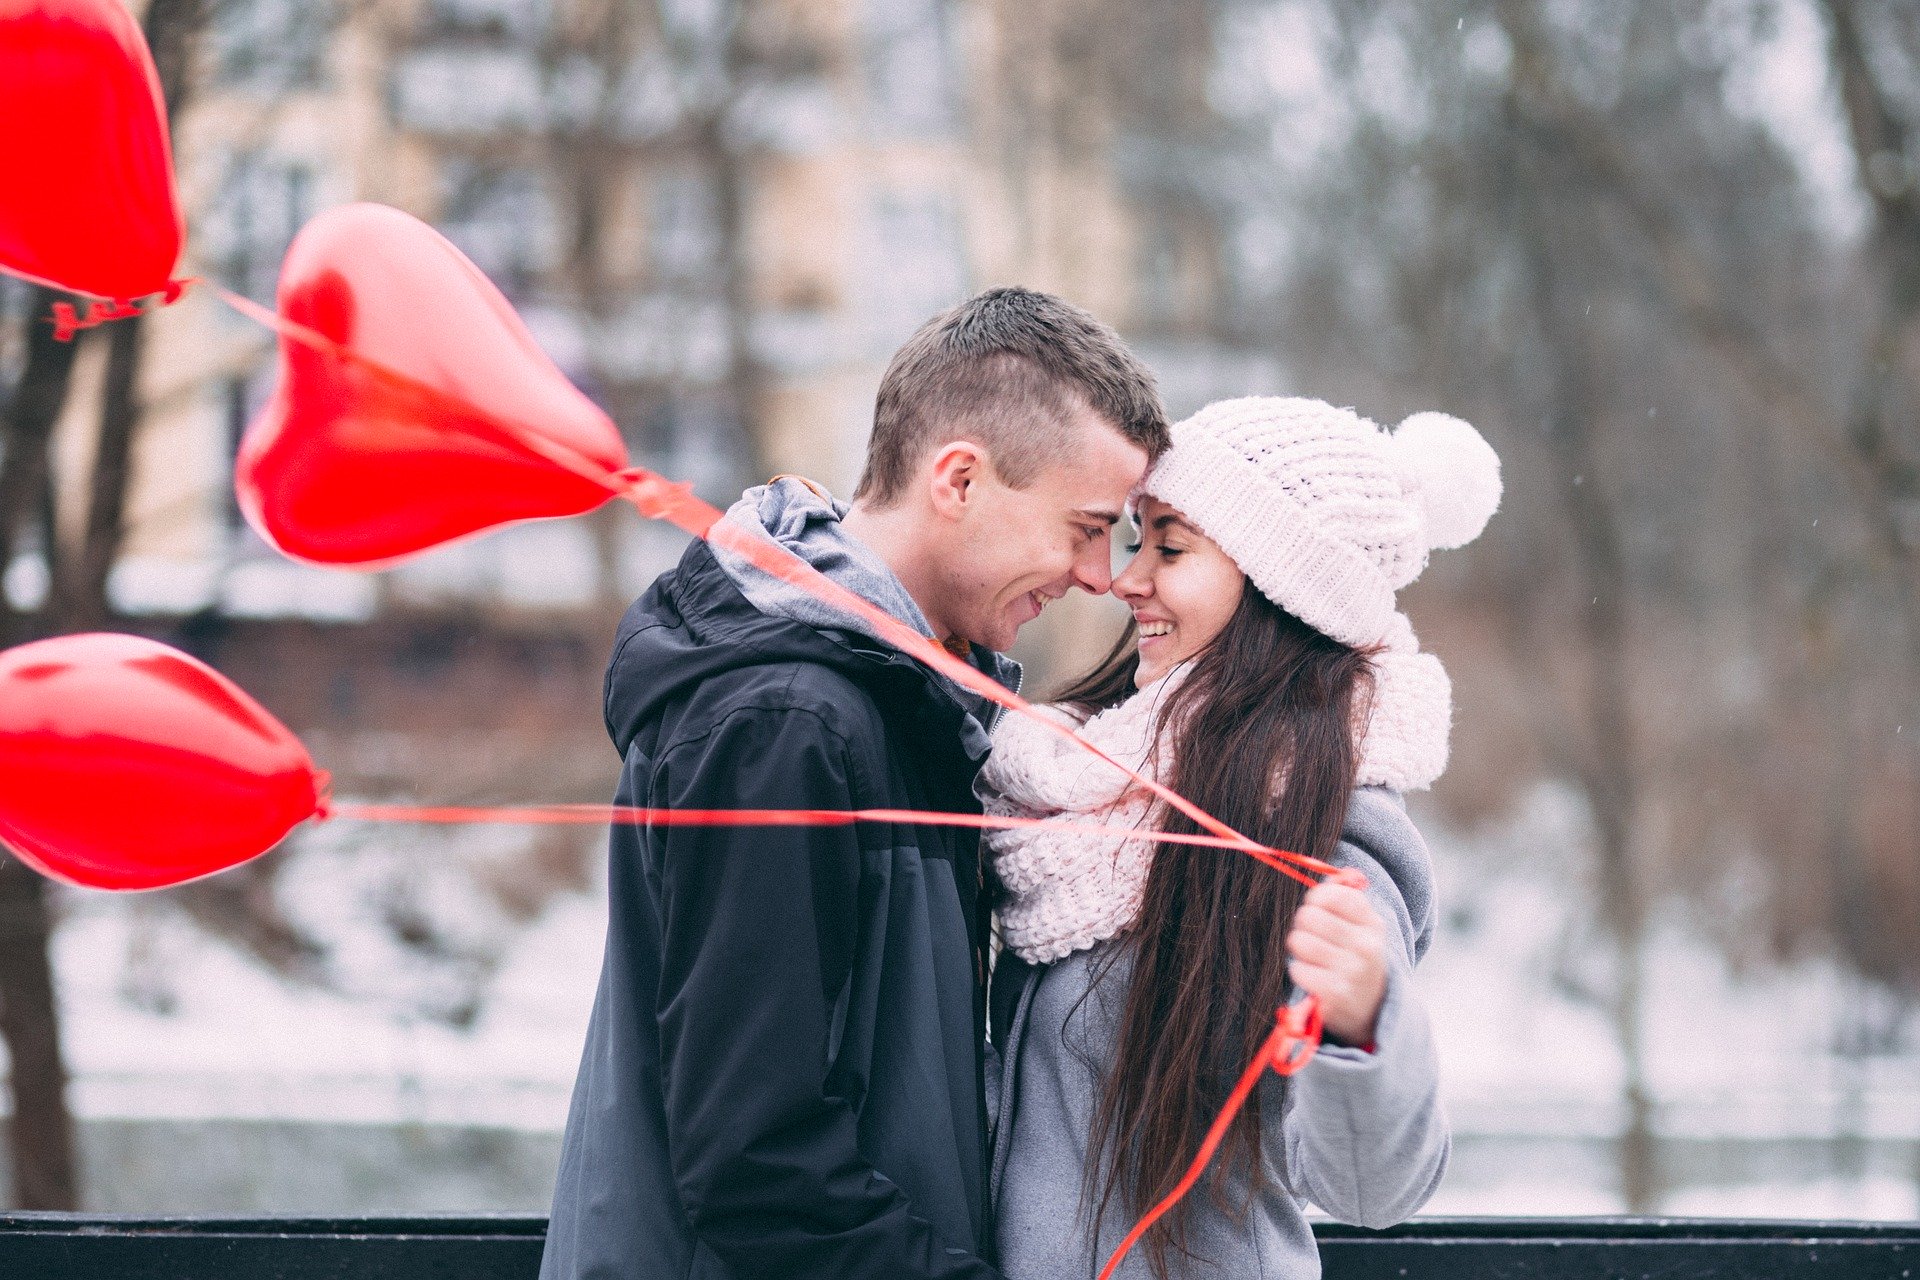 How to Make Time to Date When You Have a Busy Schedule